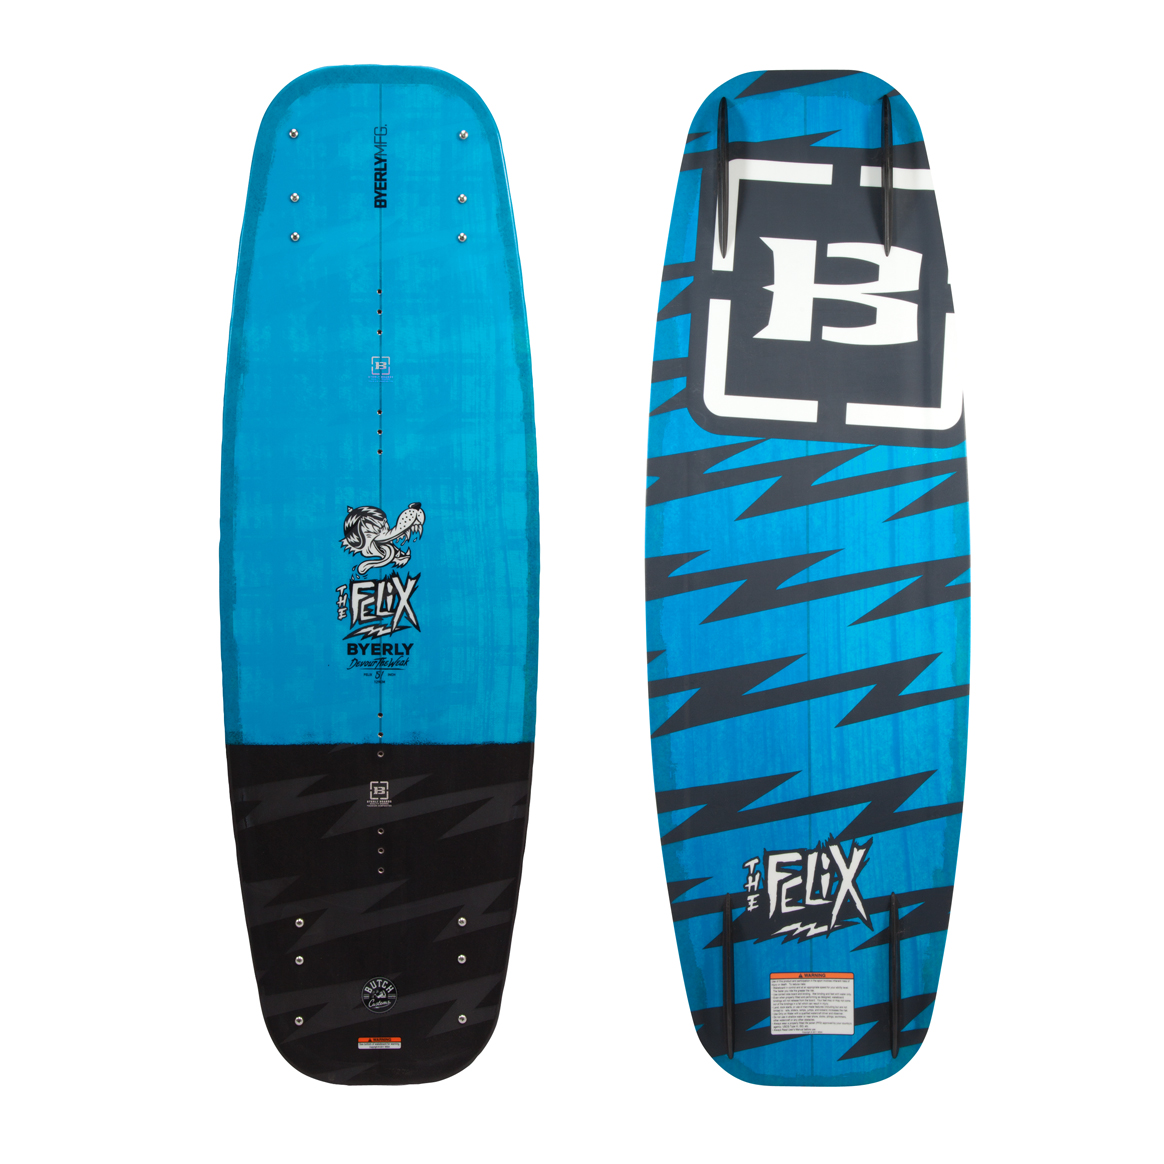 Byerly Felix Jr. Cable and Boat Board – 129cm